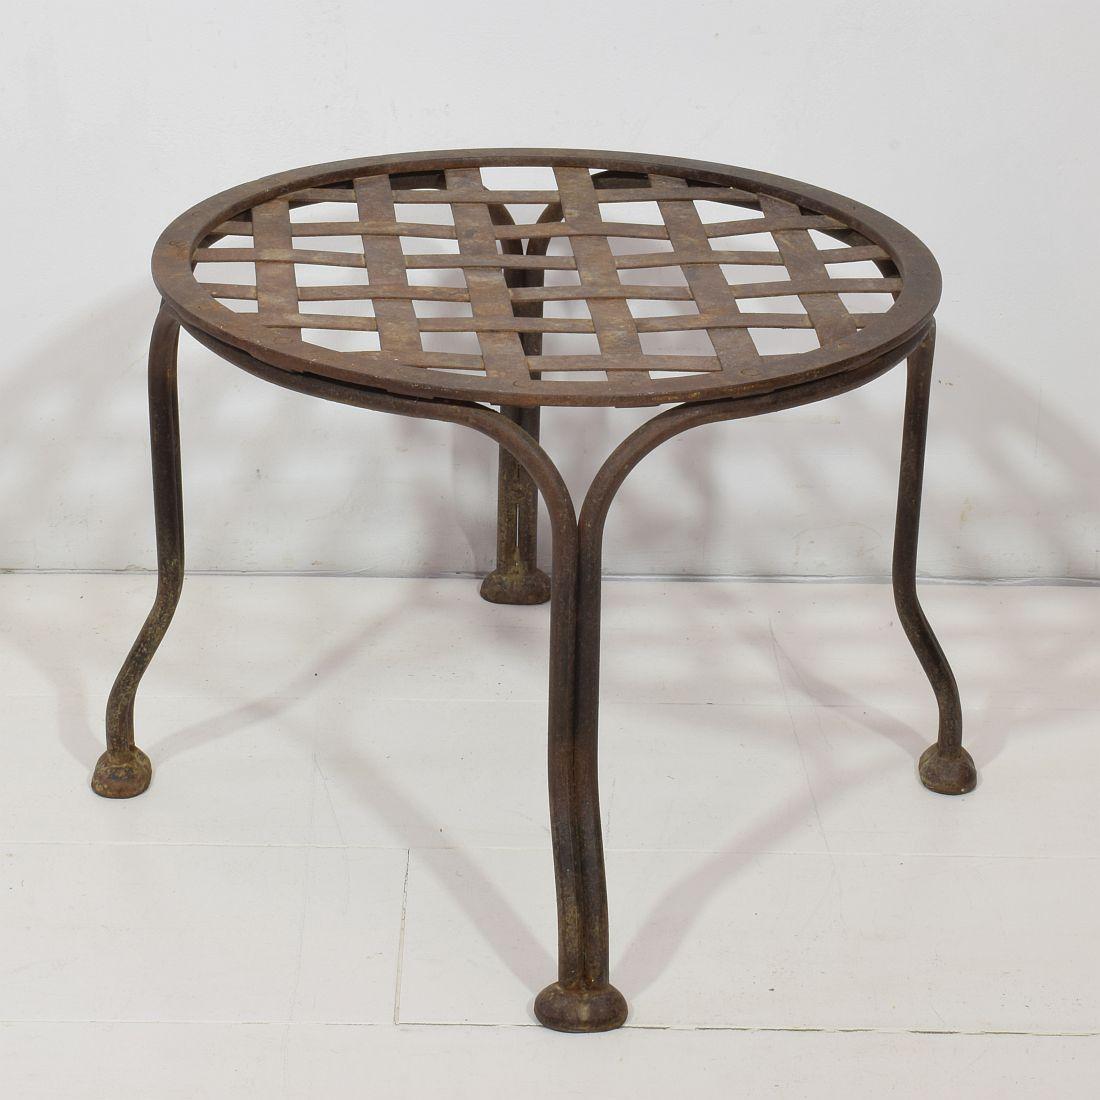 French weathered iron stool with a great robust looking patina.
France, circa 1950. Weathered but very good condition.